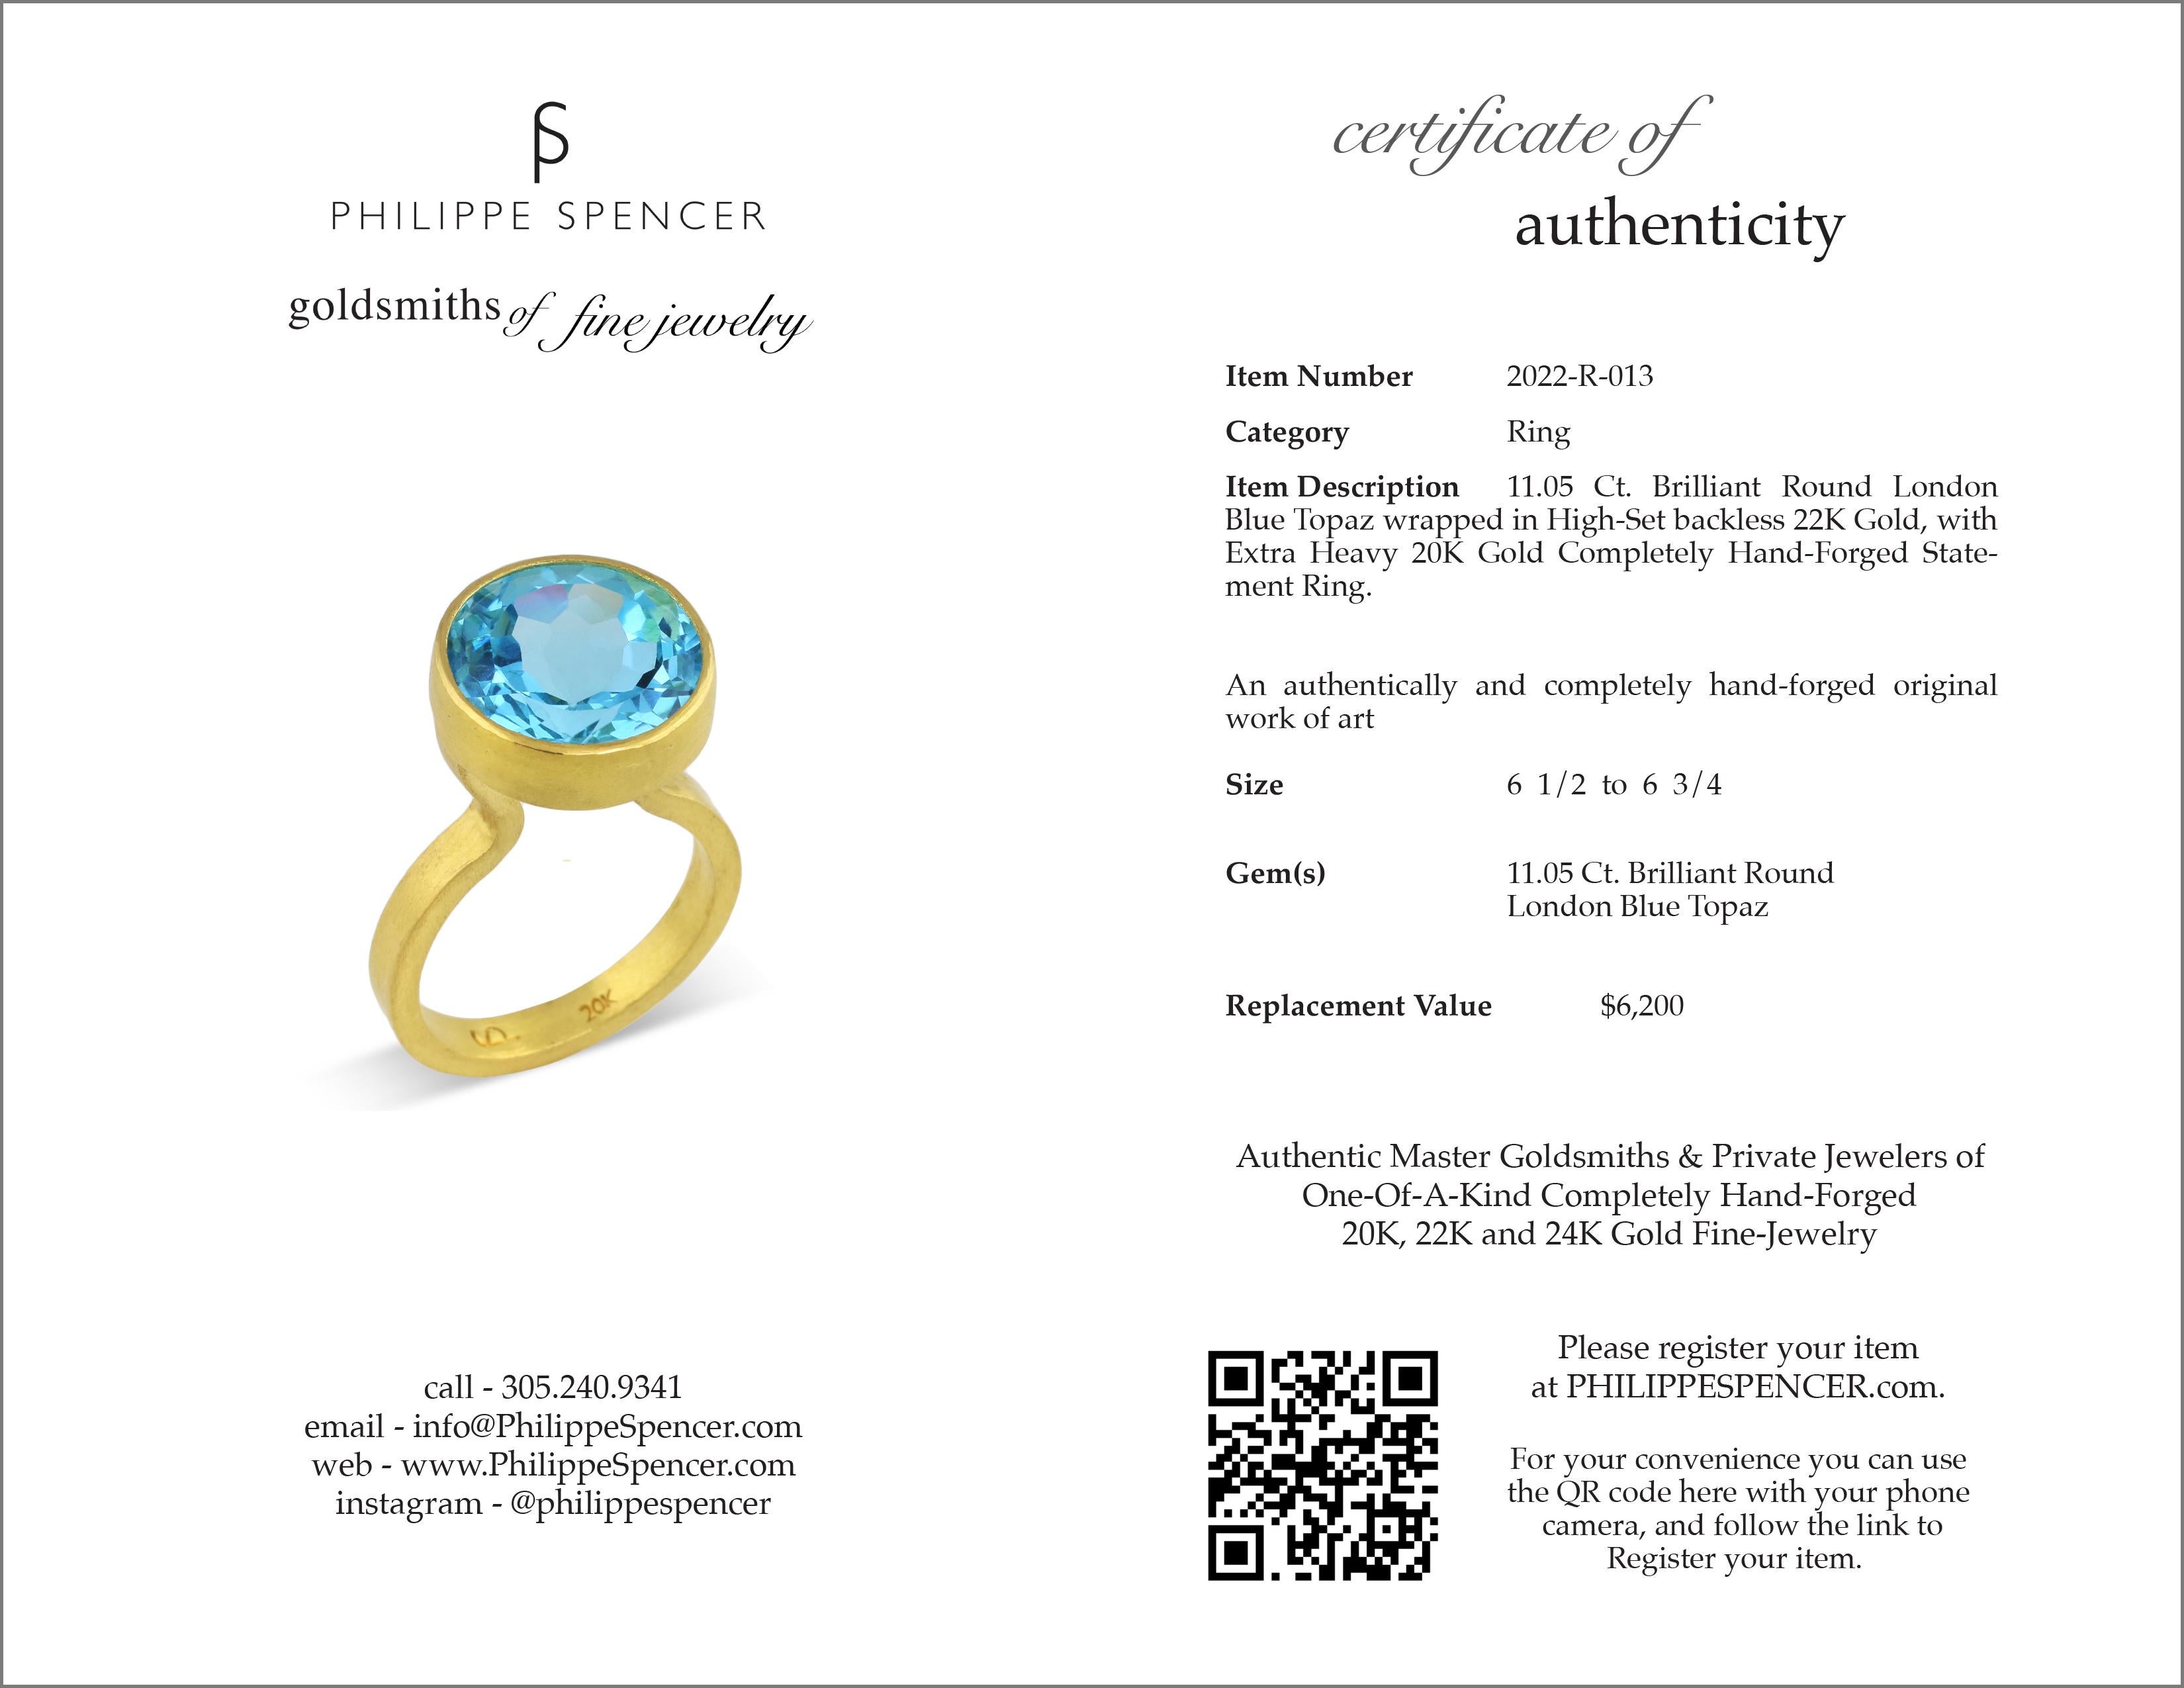 Round Cut PHILIPPE SPENCER 11.05 Ct. Blue Topaz in 22K and 20K Gold Statement Ring For Sale